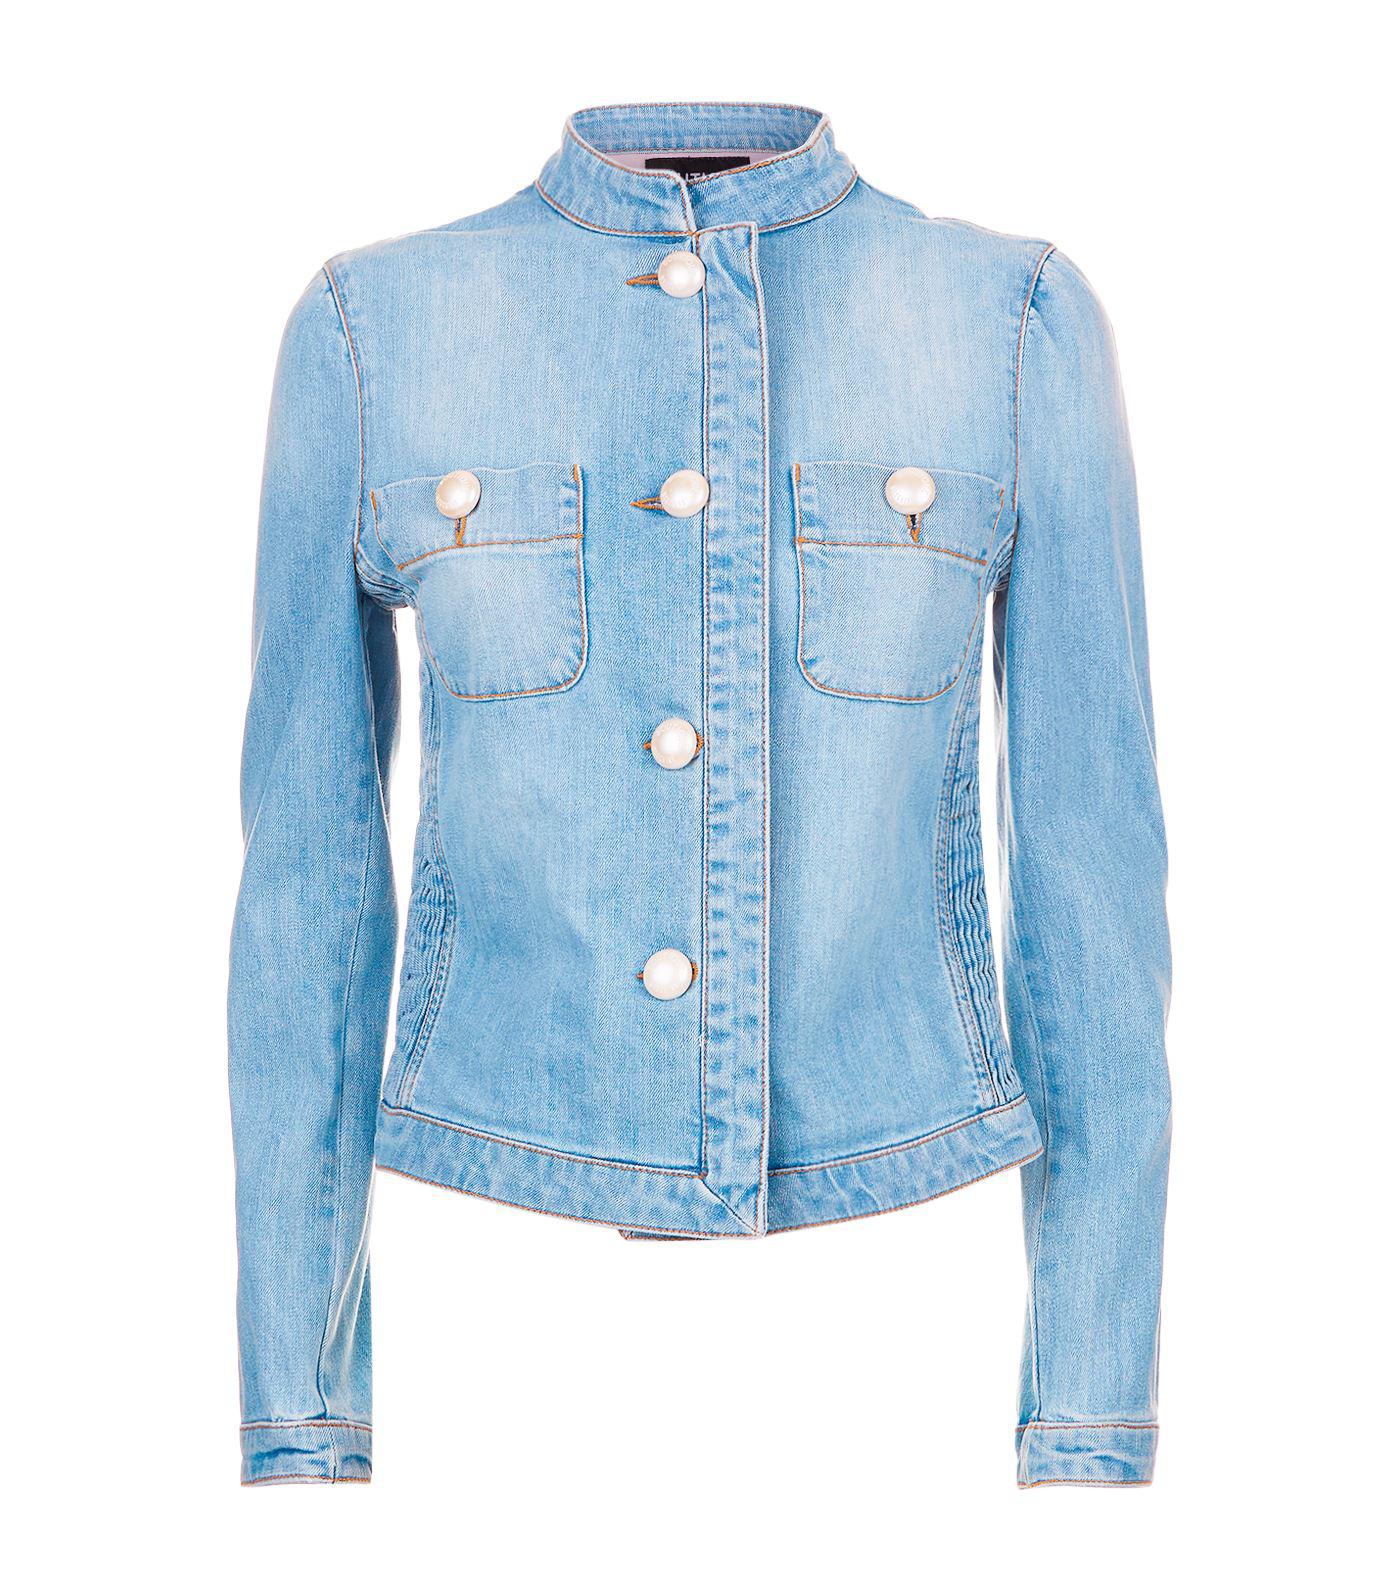 Boutique Moschino Pearl Button Denim Jacket in Blue - Lyst